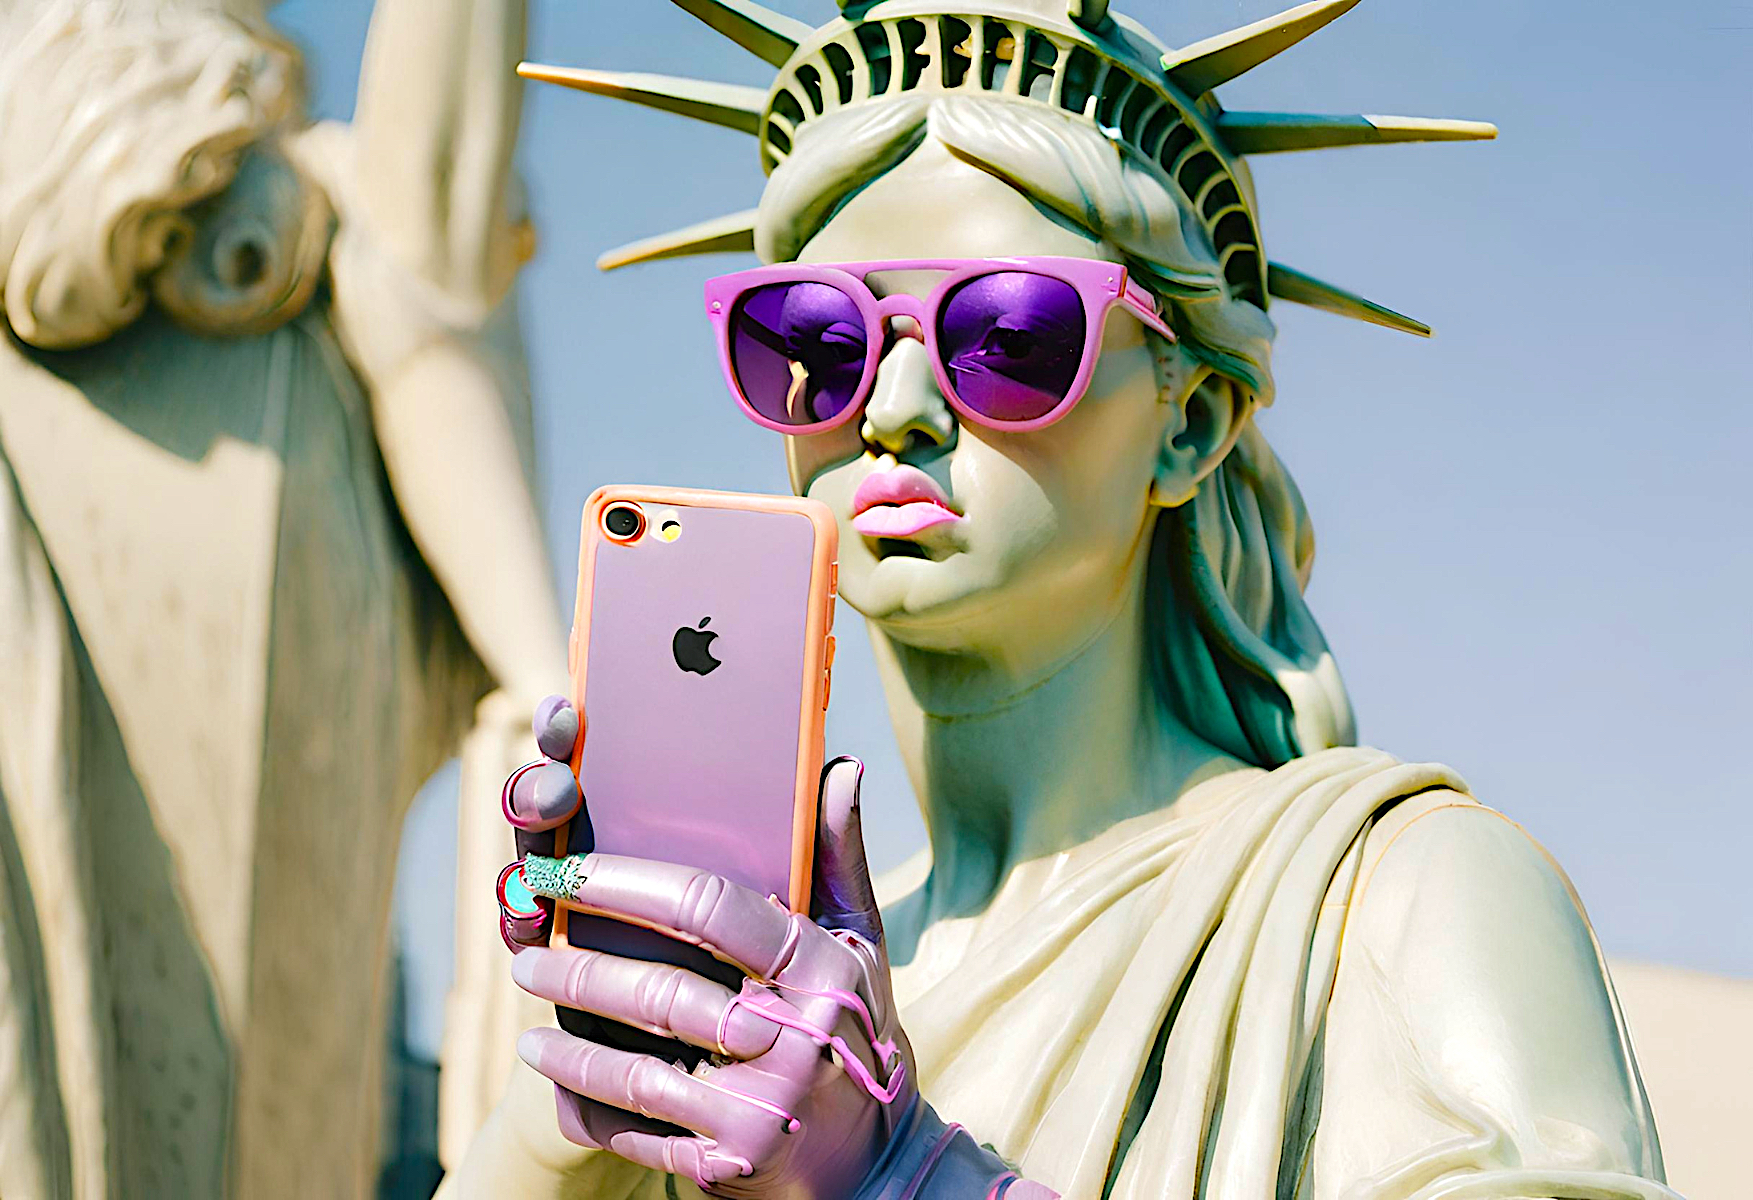 The current dilemma surrounding the relationship between freedom and social media is based on the fact that, while these platforms have democratized communication, they have also led to the creation of echo chambers, the spread of misinformation, and privacy concerns. The image seeks to illustrate this paradox with a robotic representation of the Statue of Liberty holding a mobile device, symbolizing the tension between freedom and the emerging challenges of the digital age. Image: Barriozona Magazine © 2023